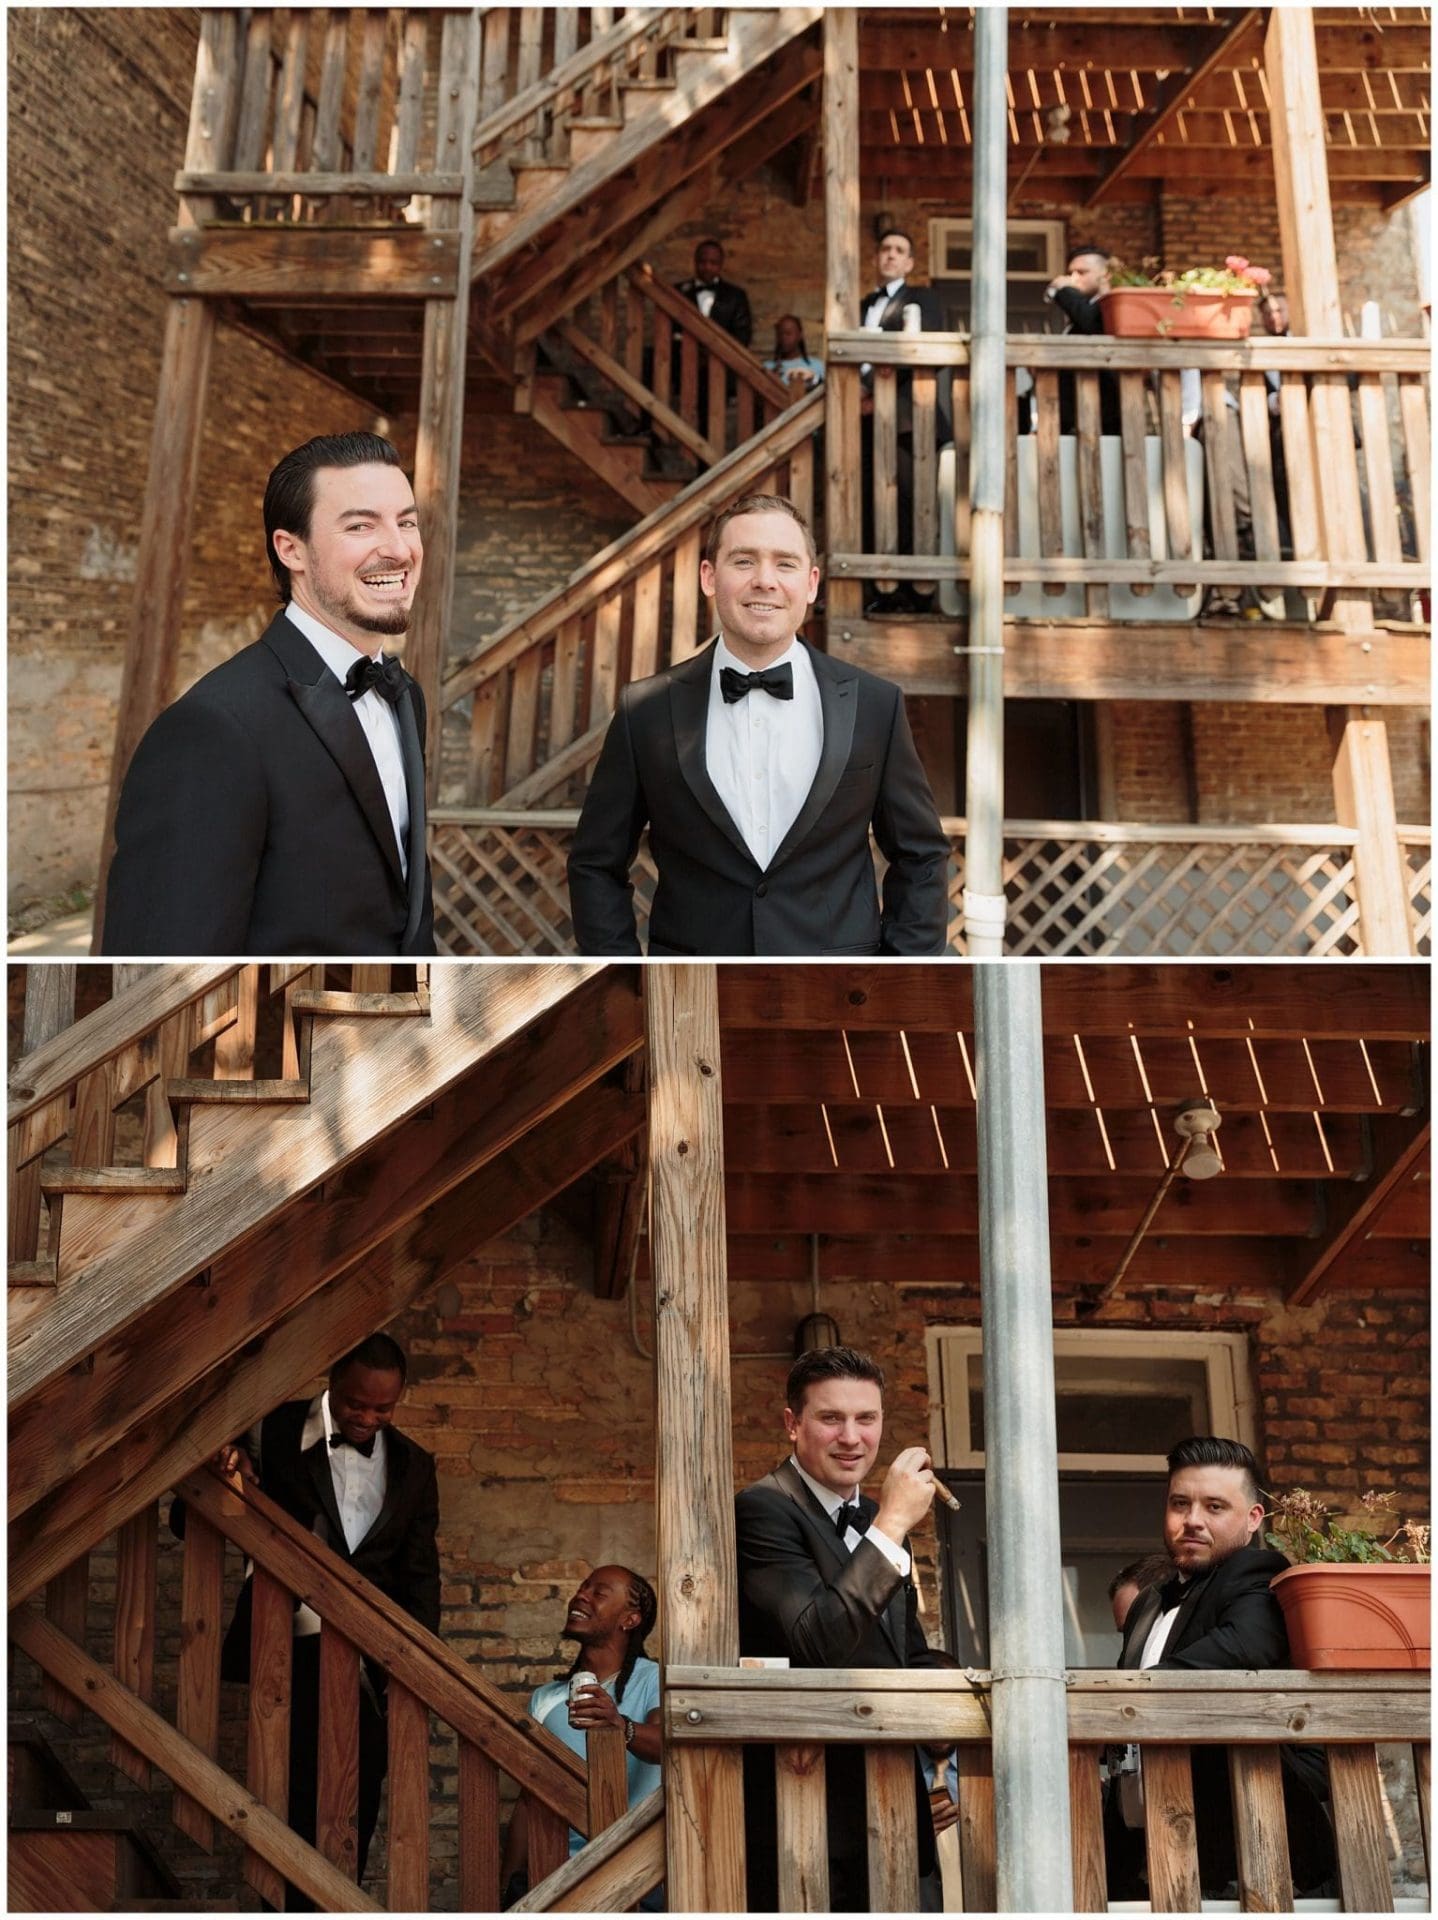 The Joinery Wedding Photography - Wes Craft Photography